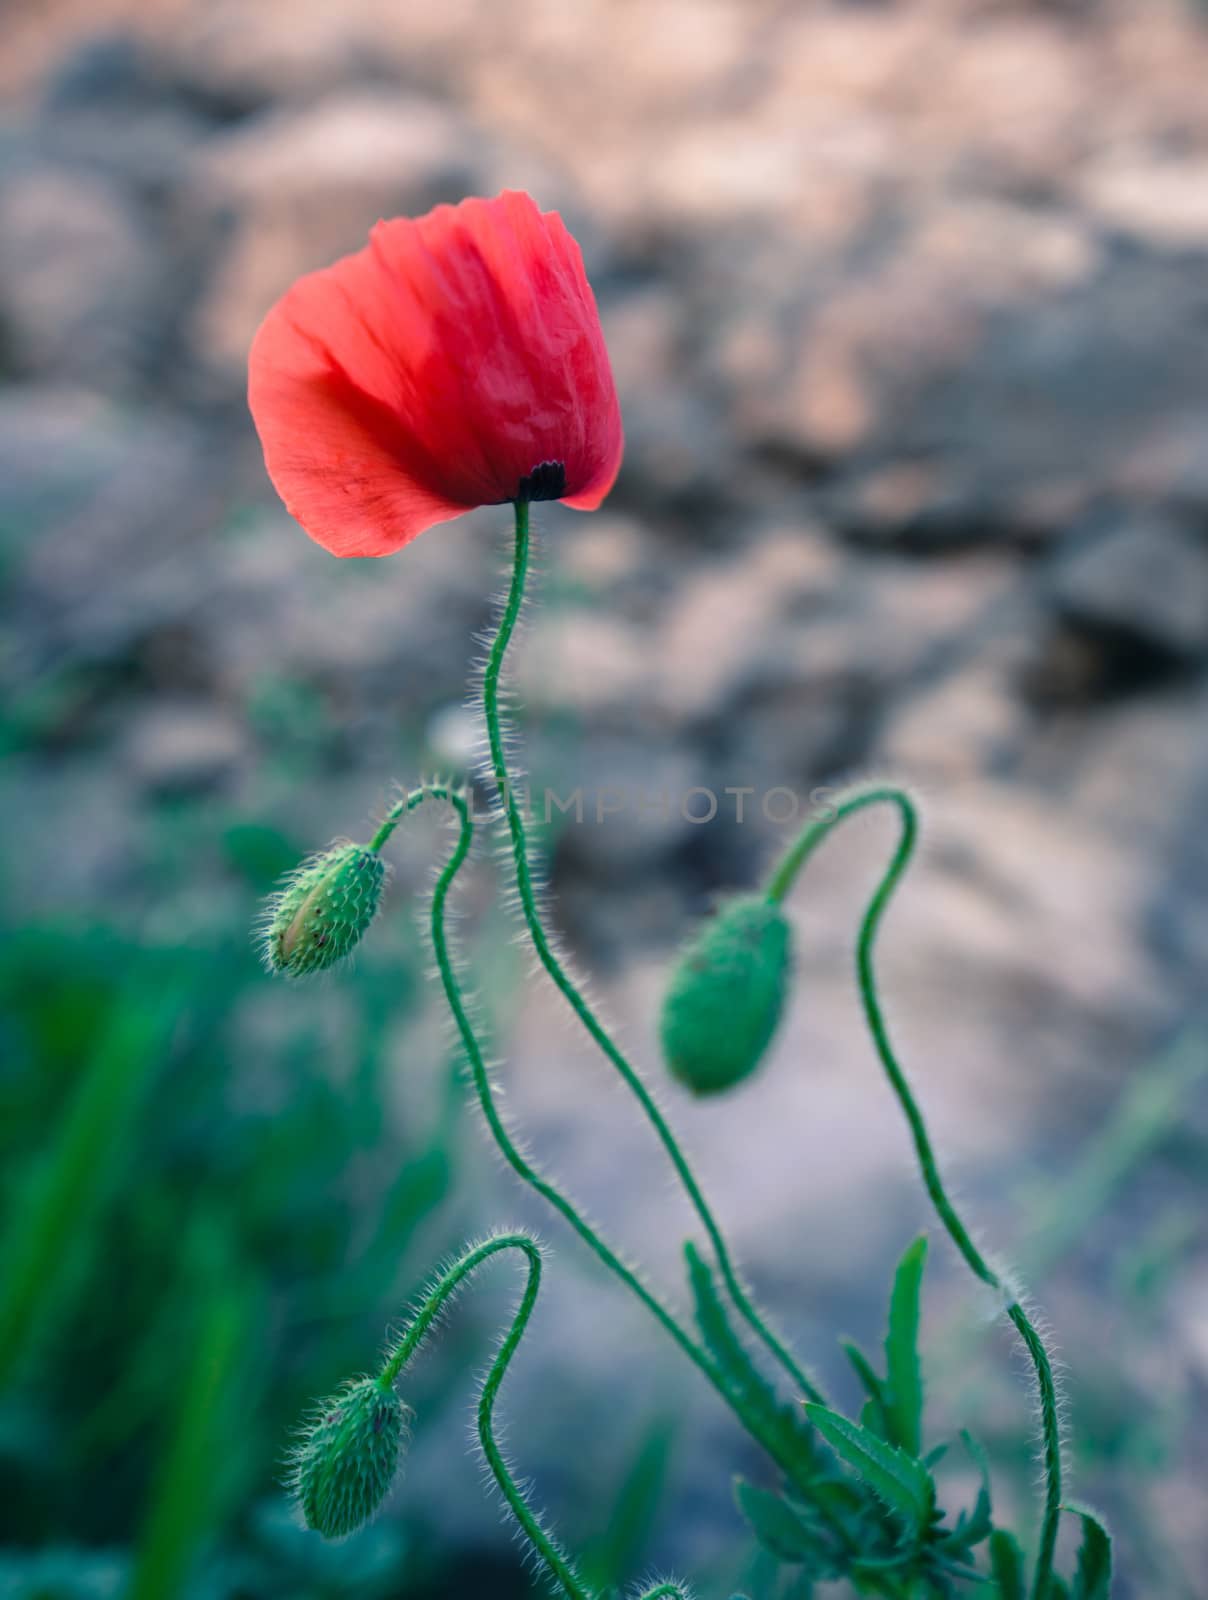 closeup image of red poppy flower